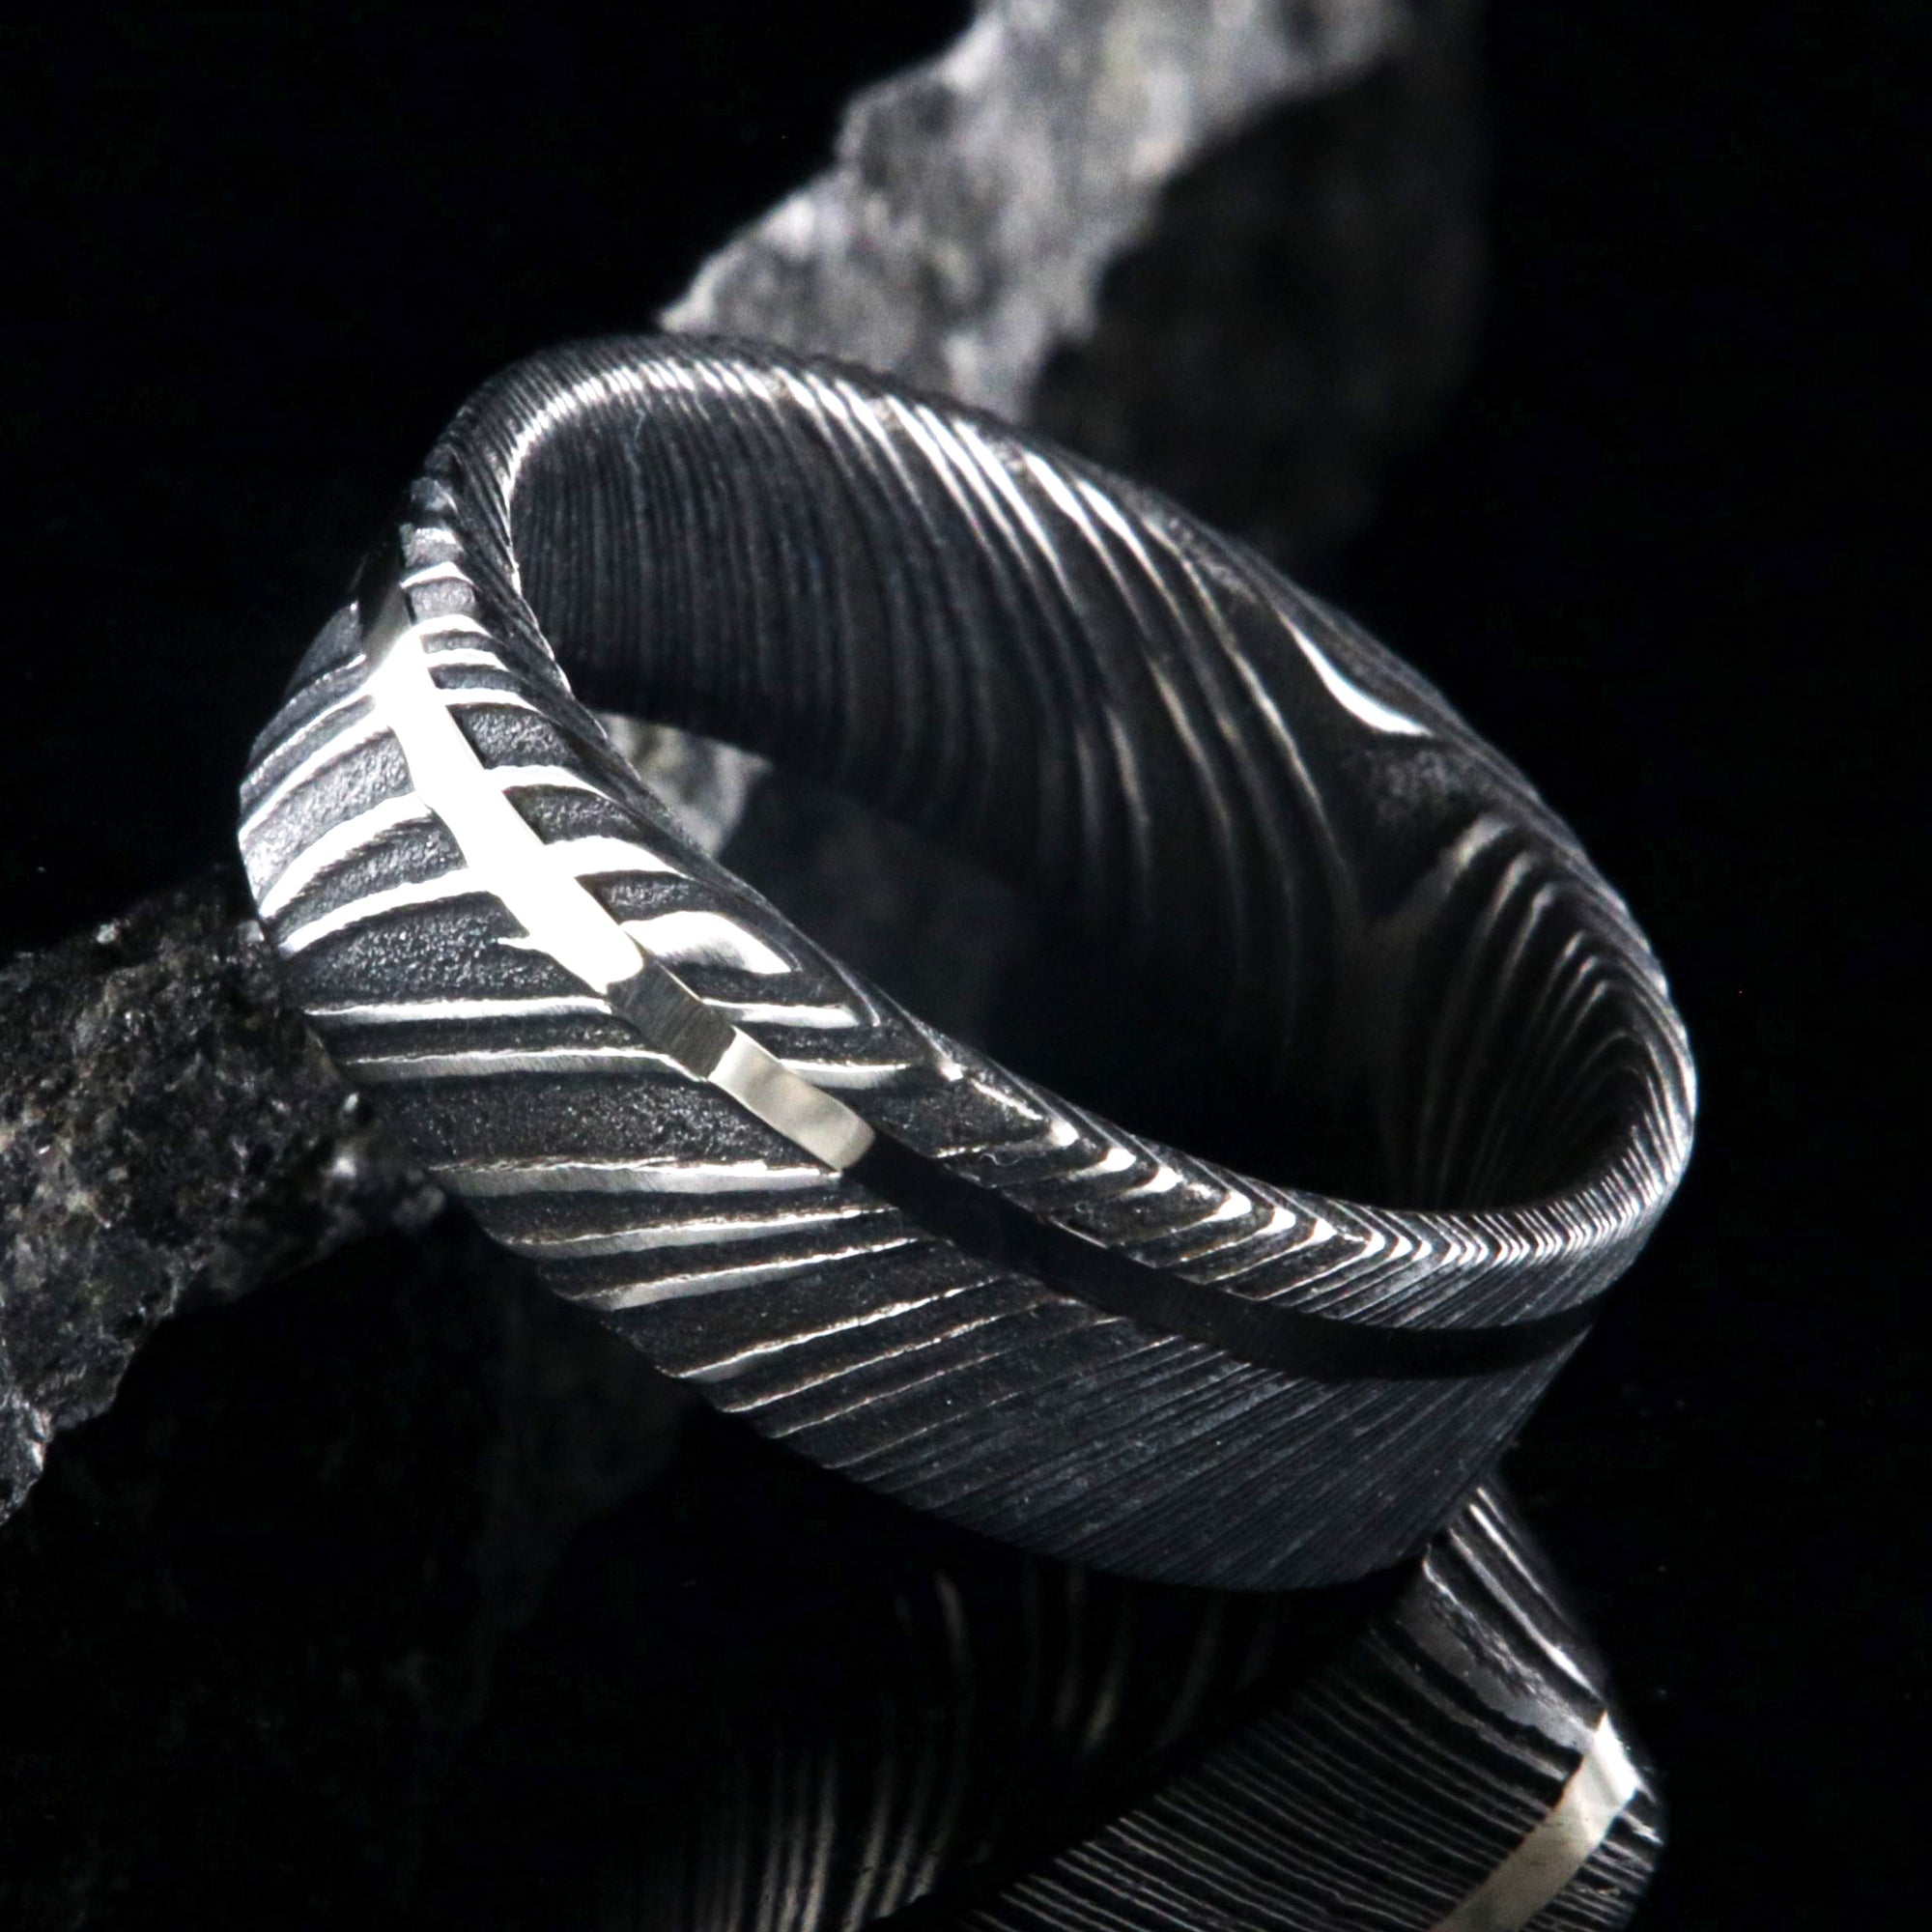 7mm wide black Damascus steel wedding ring with a white gold inlay